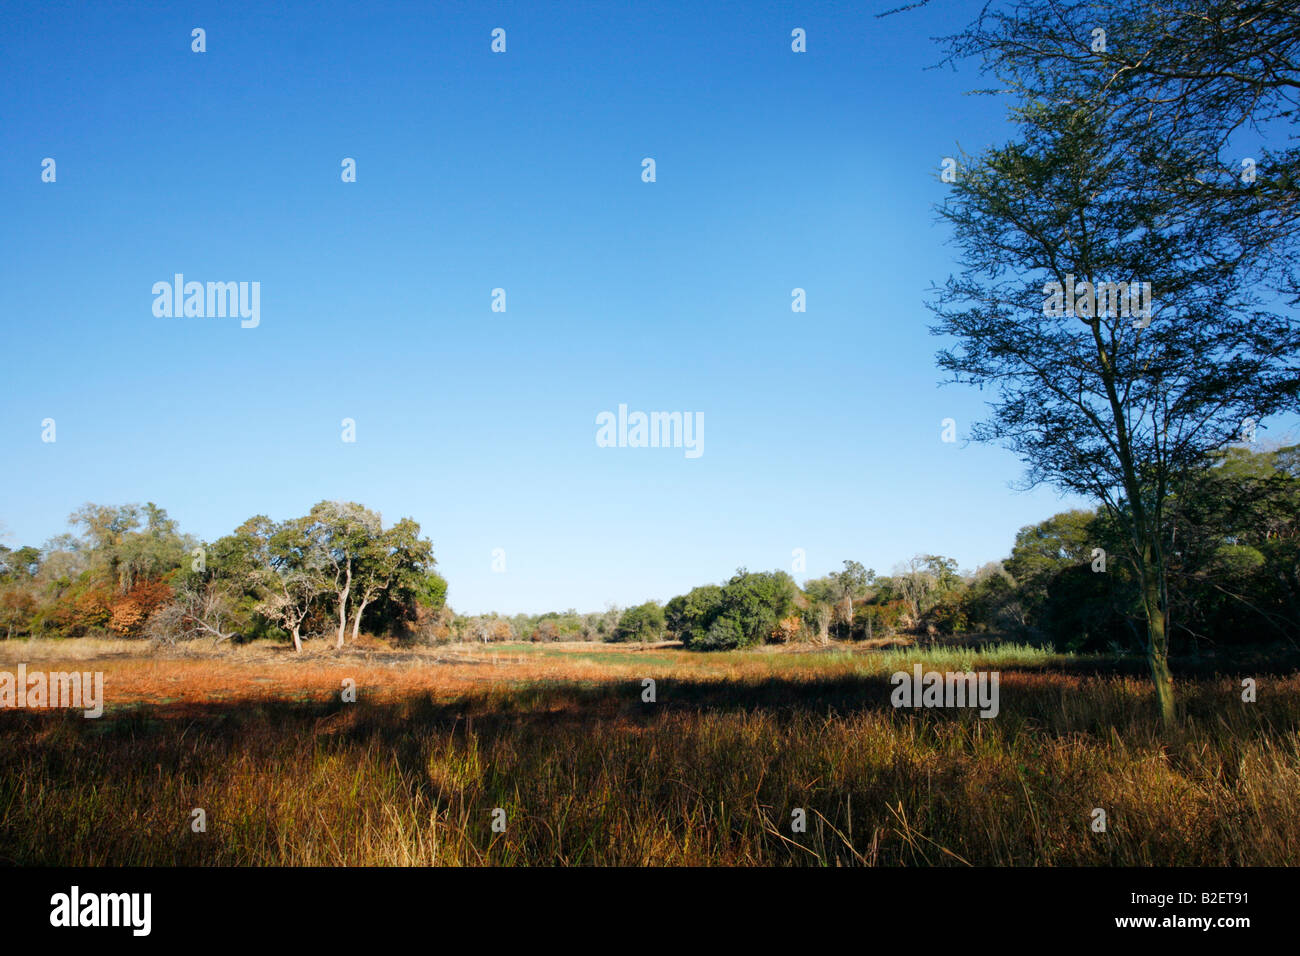 A landscape in the Zinave National park showing a seasonal wetland surrounded by dense woodland Stock Photo